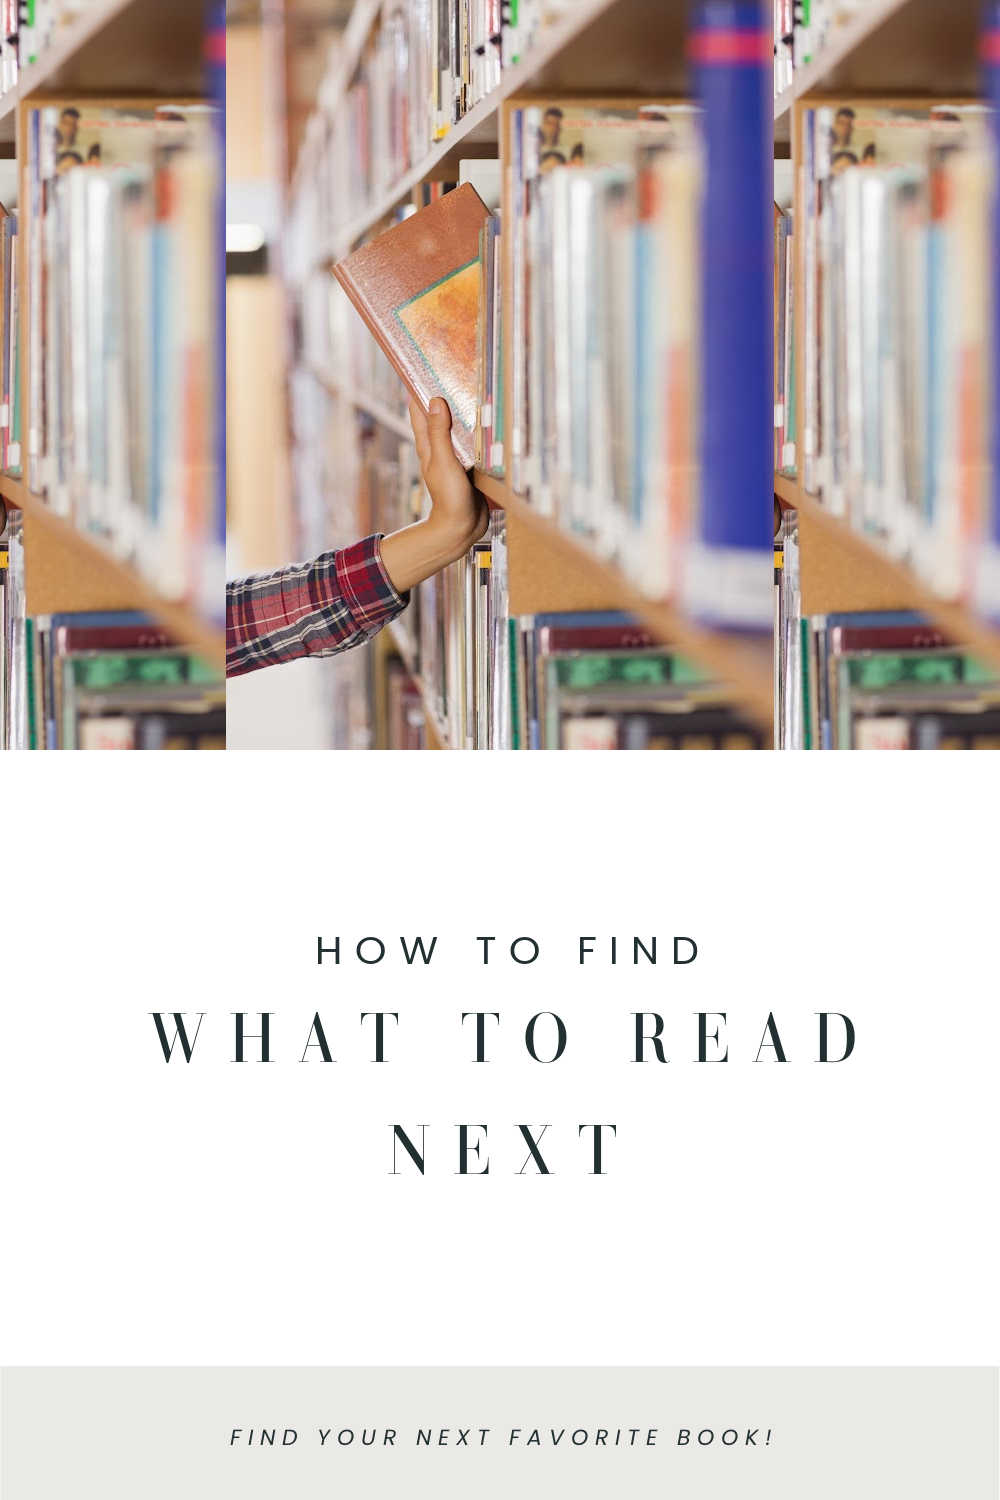 FIND WHAT TO READ NEXT